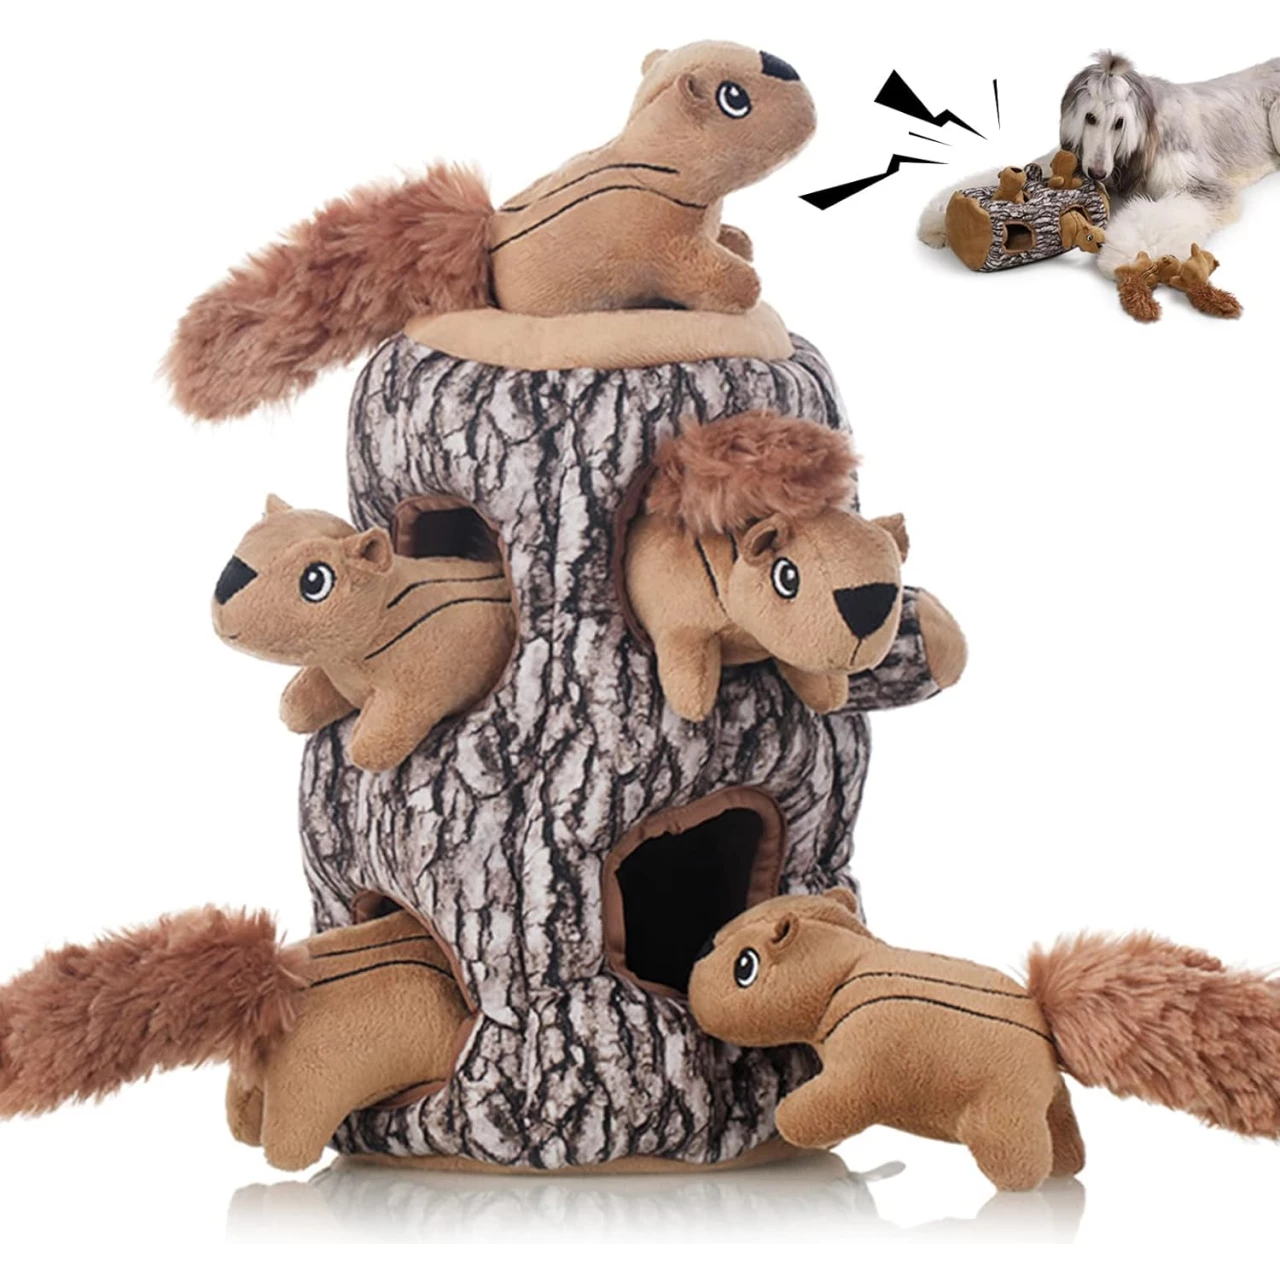 Laifug Hidden Squirrel Plush Dog Toy， Interactive Squeaky Dog Toy Hide and Seek, XL